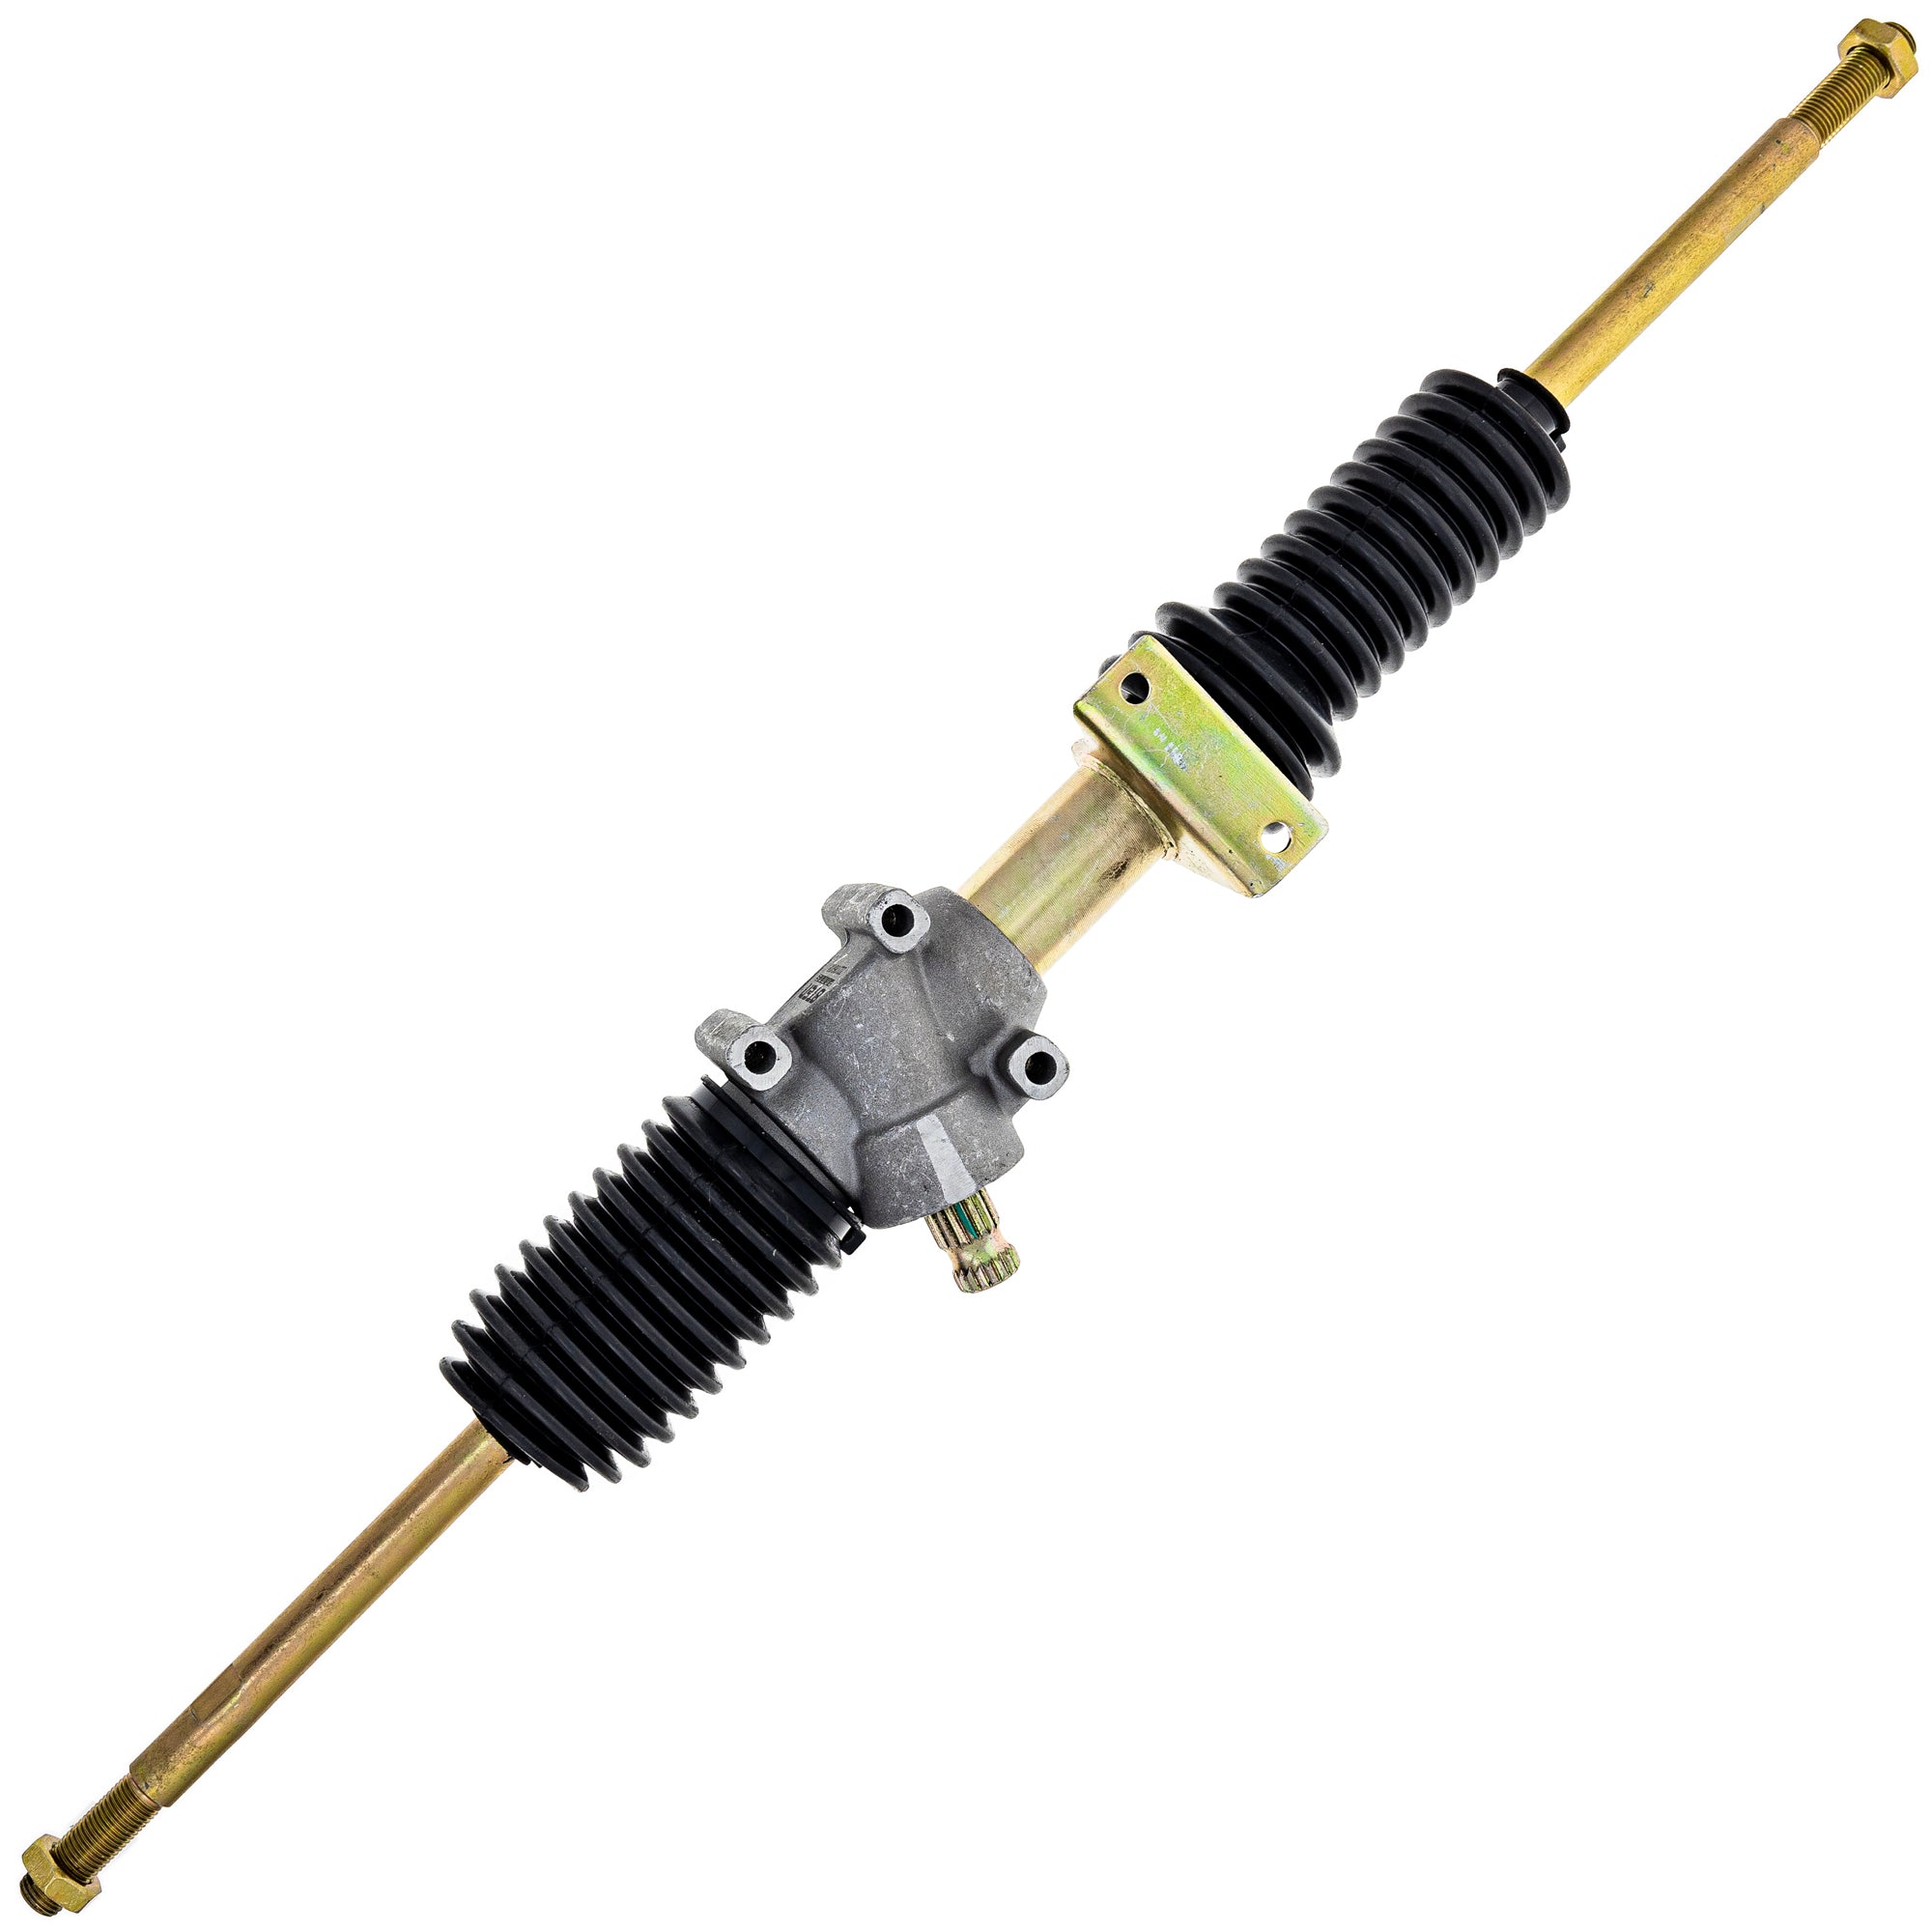 NICHE 519-CSR2248A Steering Rack Assembly for Polaris RZR